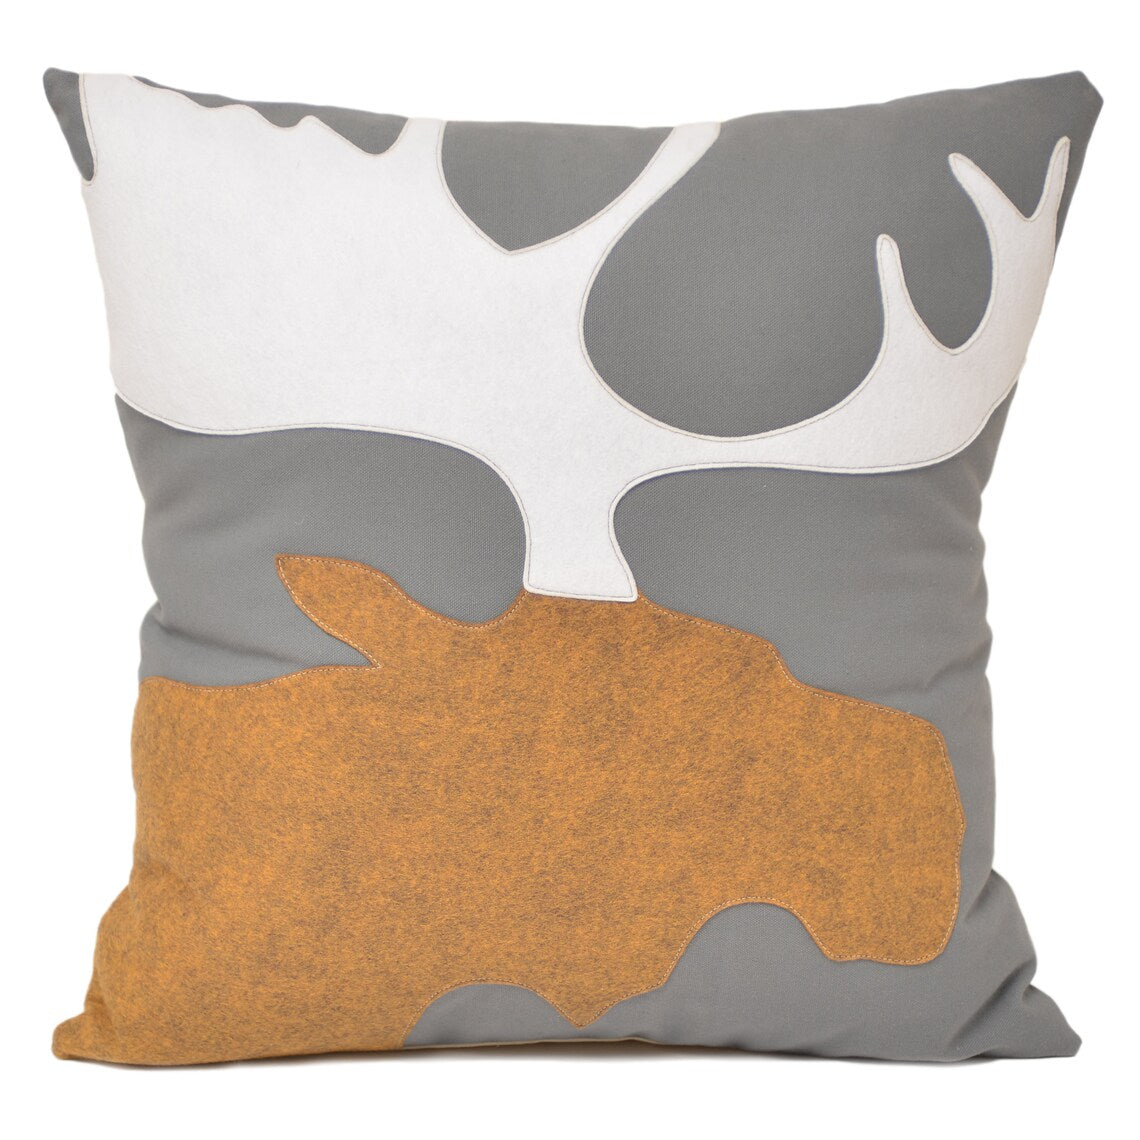 Moose with Antlers Large Decorative Throw Pillow